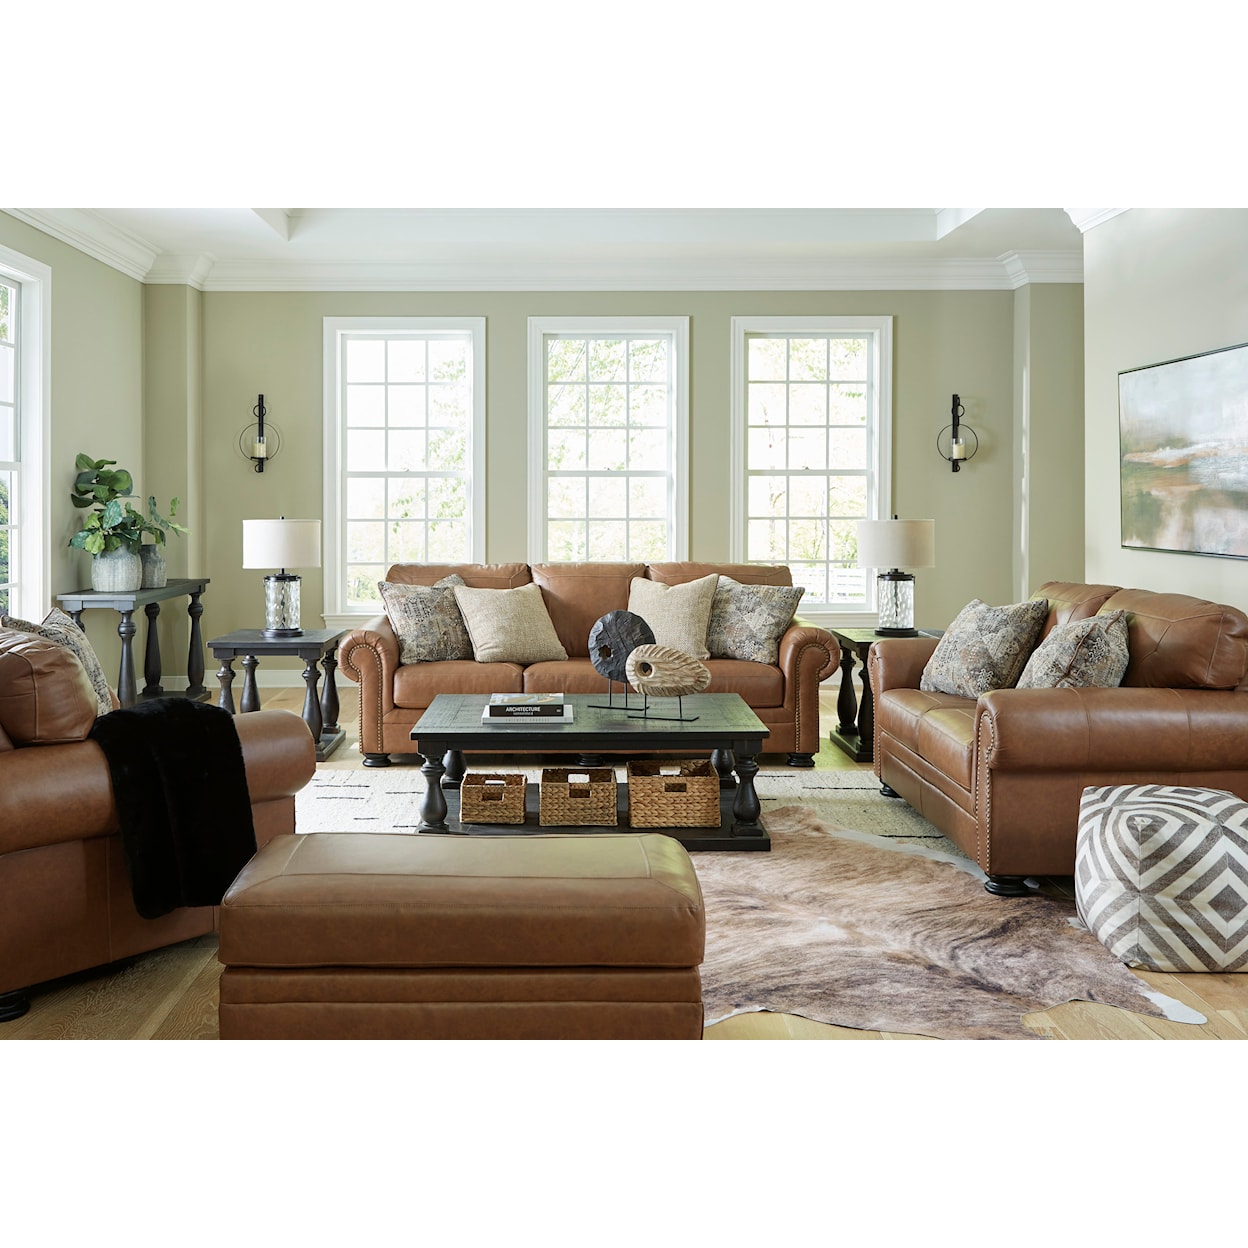 Signature Design by Ashley Furniture Carianna 4-Piece Living Room Set